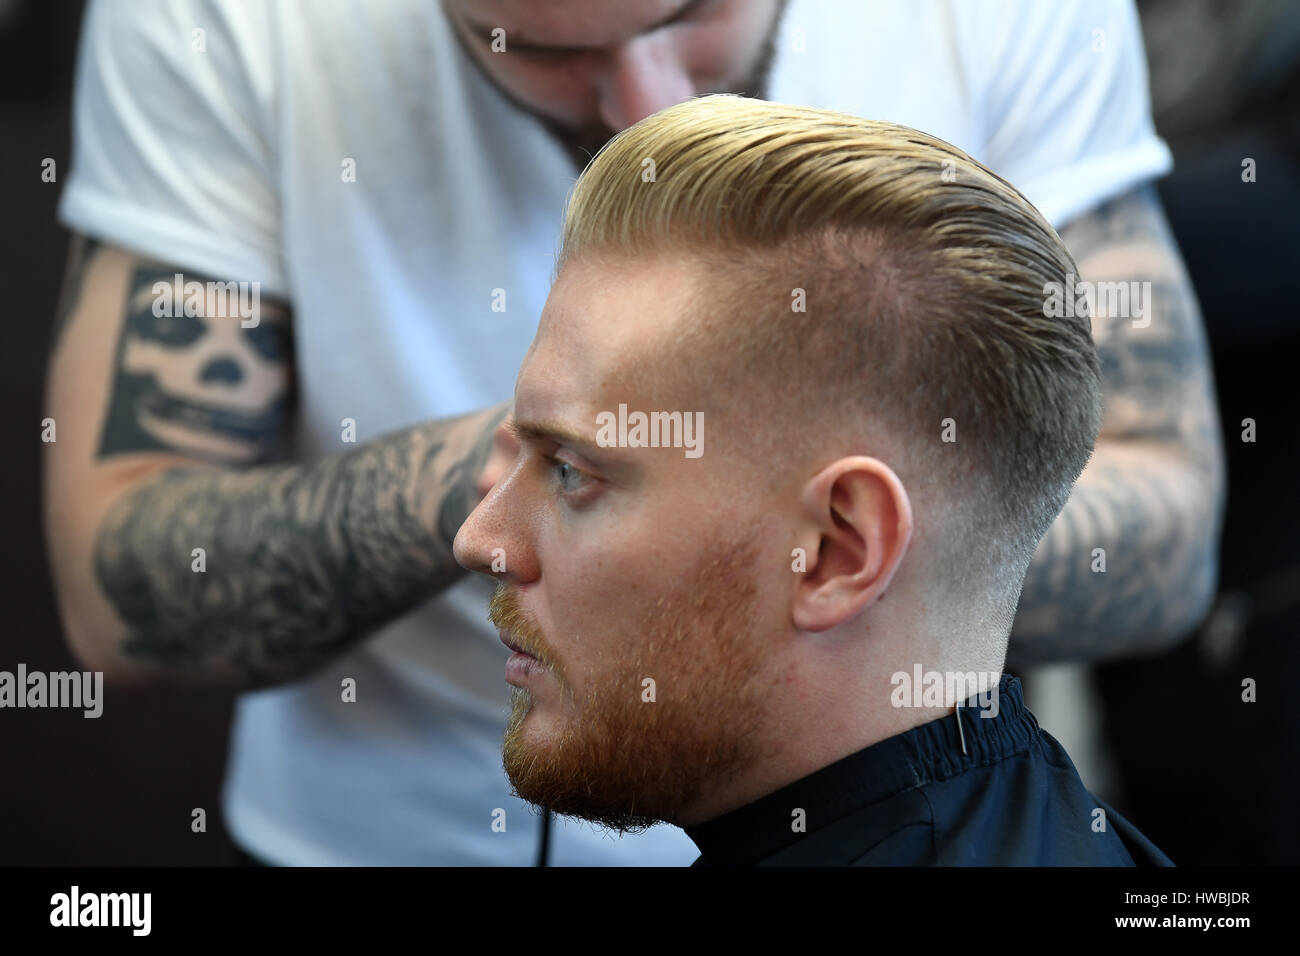 Duesseldorf, Germany. 20th Mar, 2017. Models Johann gets a new hairstyle at  the Top Hair hairdressing exposition press conference in Duesseldorf,  Germany, 20 March 2017. The latest trends will be shown at